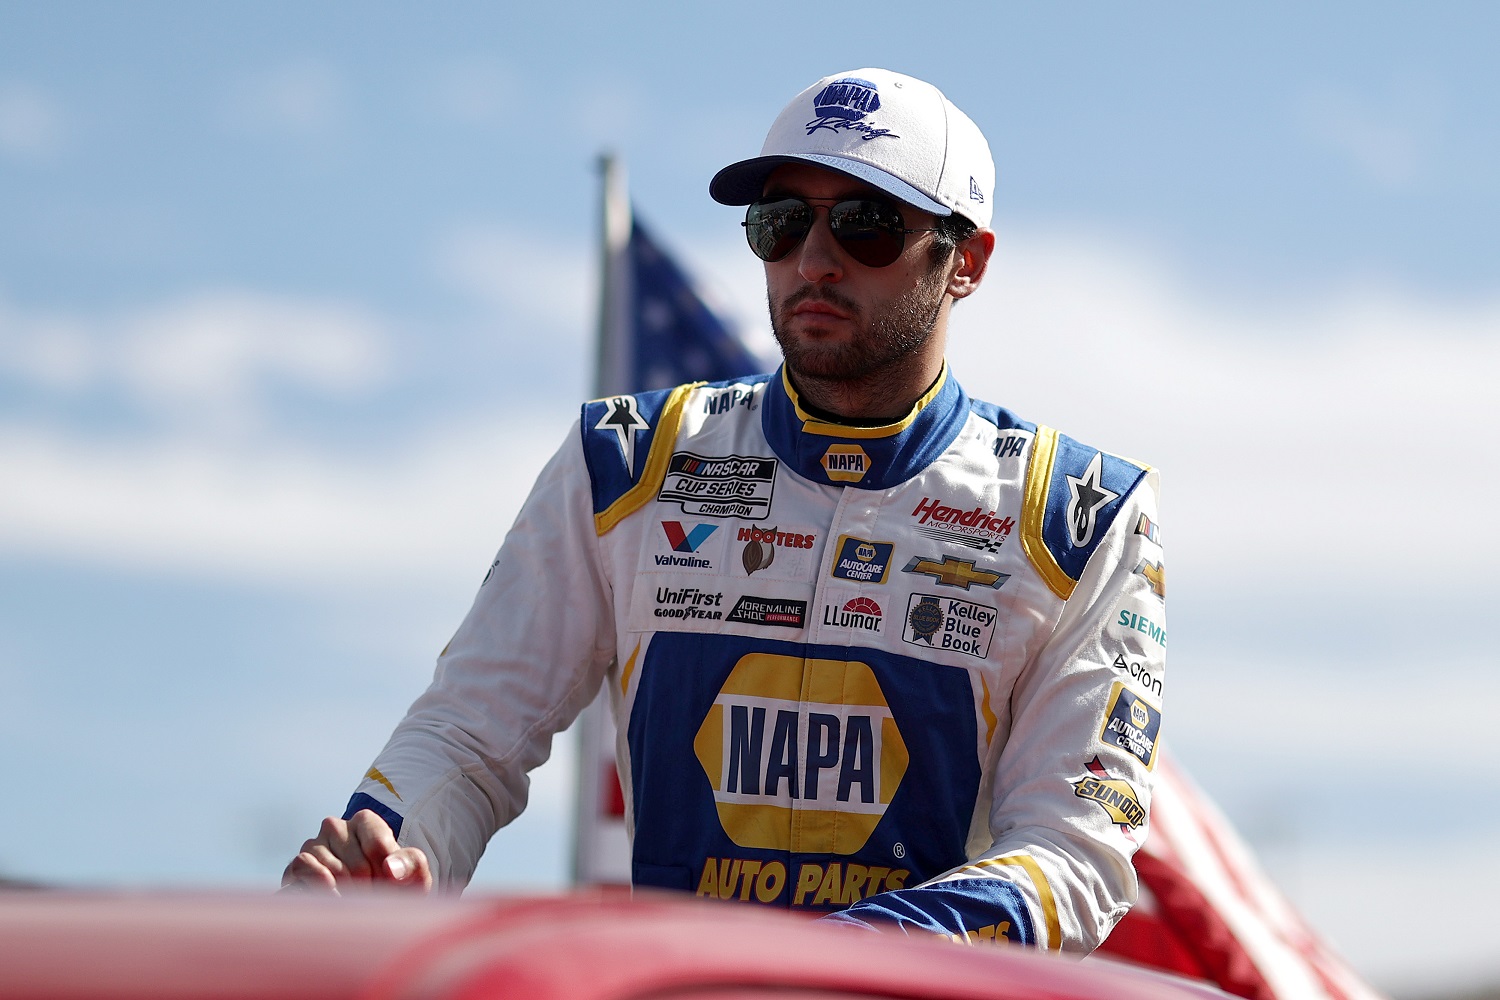 Chase Elliott, driver of the No. 9 Chevrolet, makes his Championship 4 introduction parade lap prior prior to the NASCAR Cup Series Championship at Phoenix Raceway on Nov. 7, 2021. | Chris Graythen/Getty Images